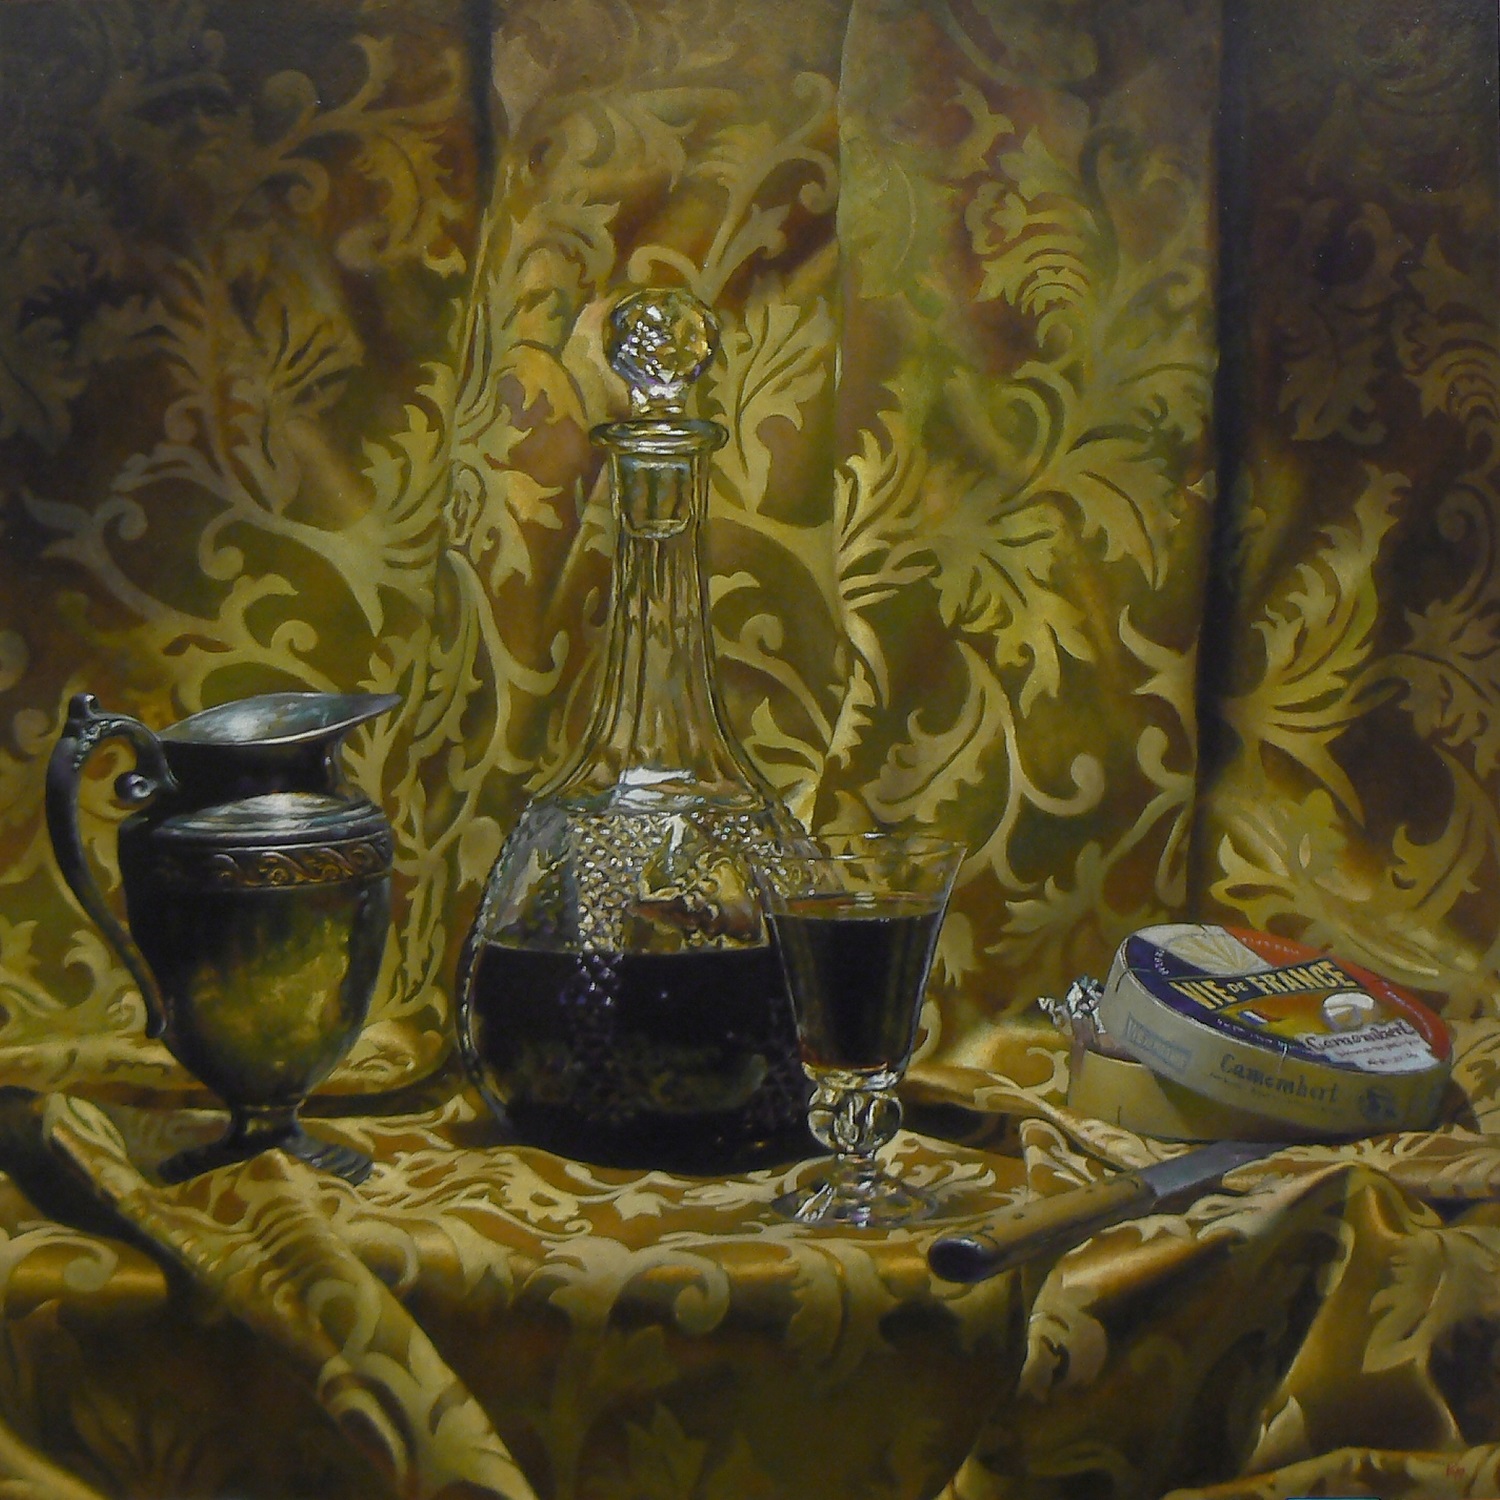 "Silver, Wine, and Cheese" Oil on panel, 24x24 inches, 2012 (sold)